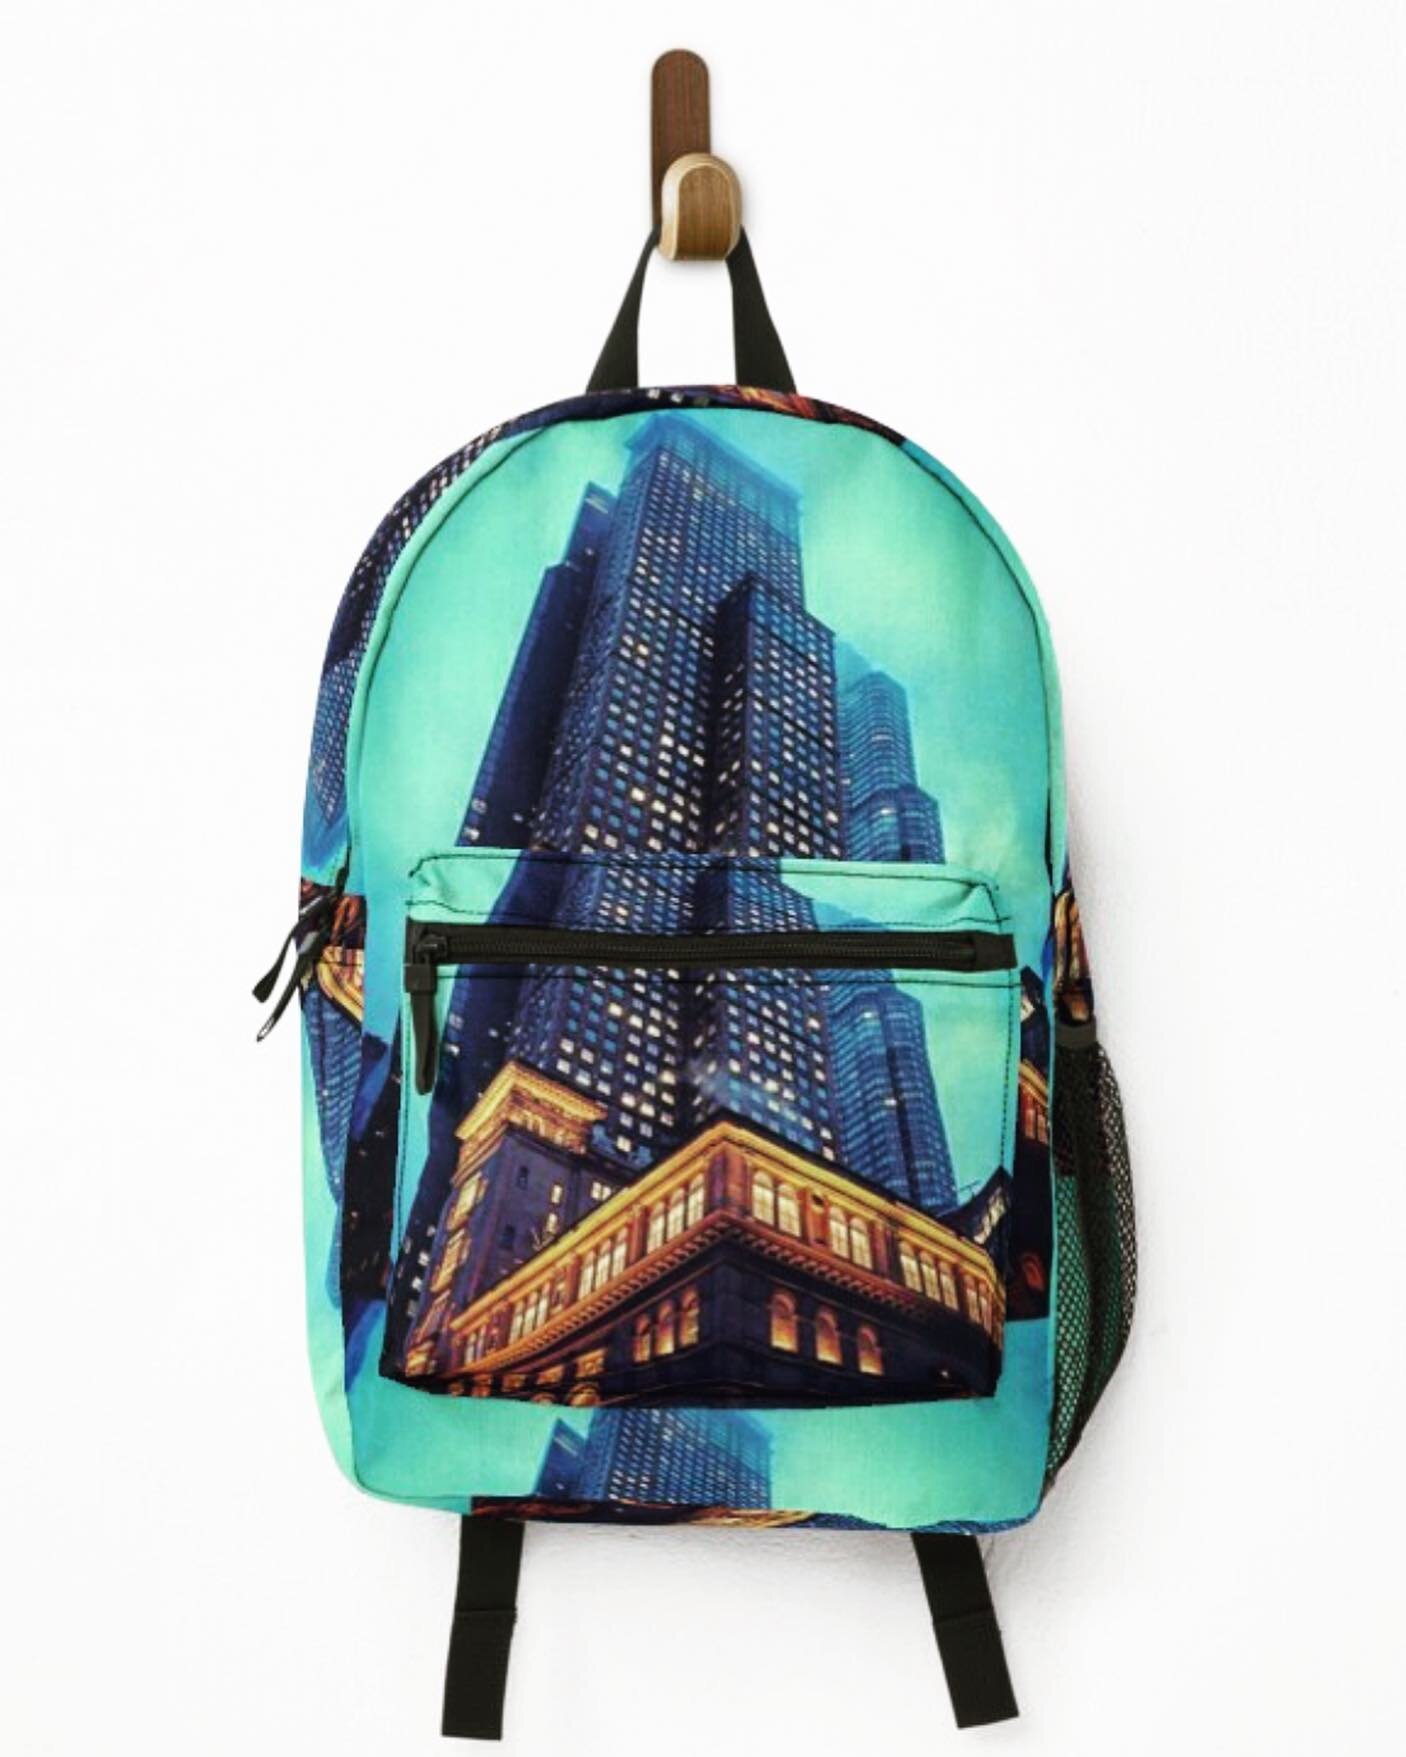 New Backpack available #backpack #backpackdesign #design #graphicdesign #manhattan #nyc #carnagiehall #skyscraper #instadesign #redbubble #redbubbleartist #teal #backtoschool